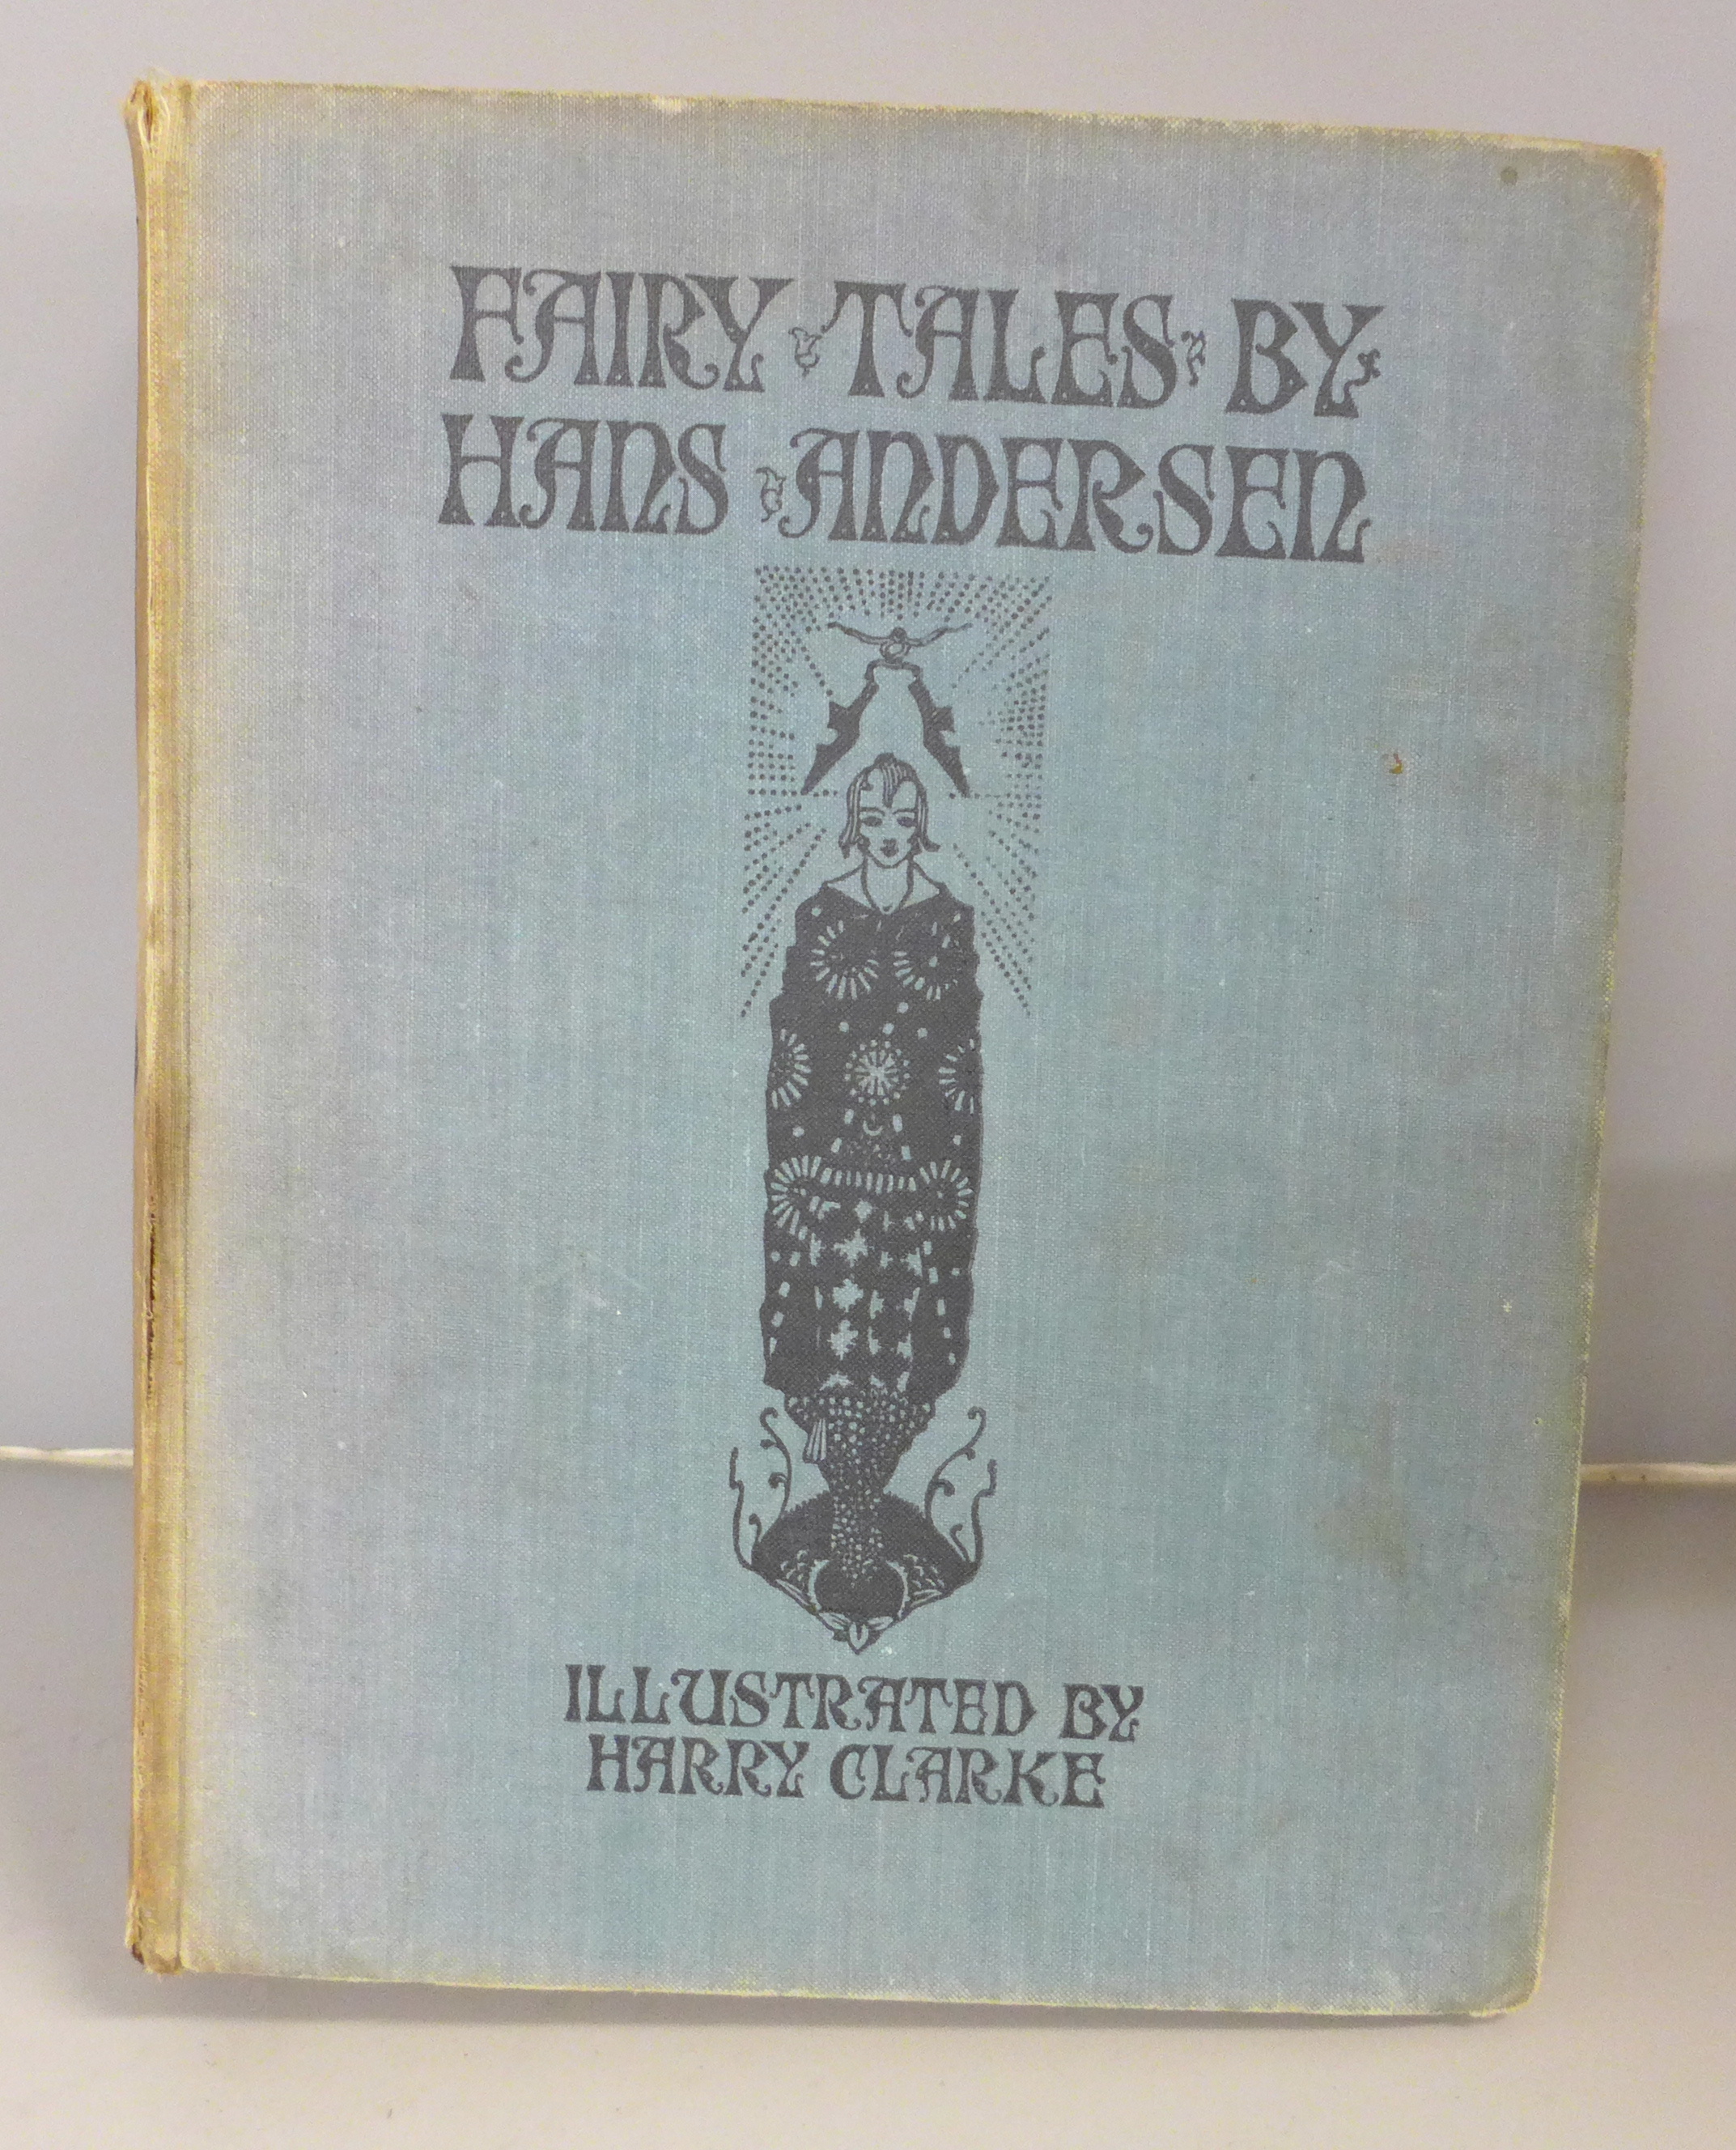 Fairy Tales by Hans Anderson, illustrated by Harry Clarke, circa 1930, original cloth